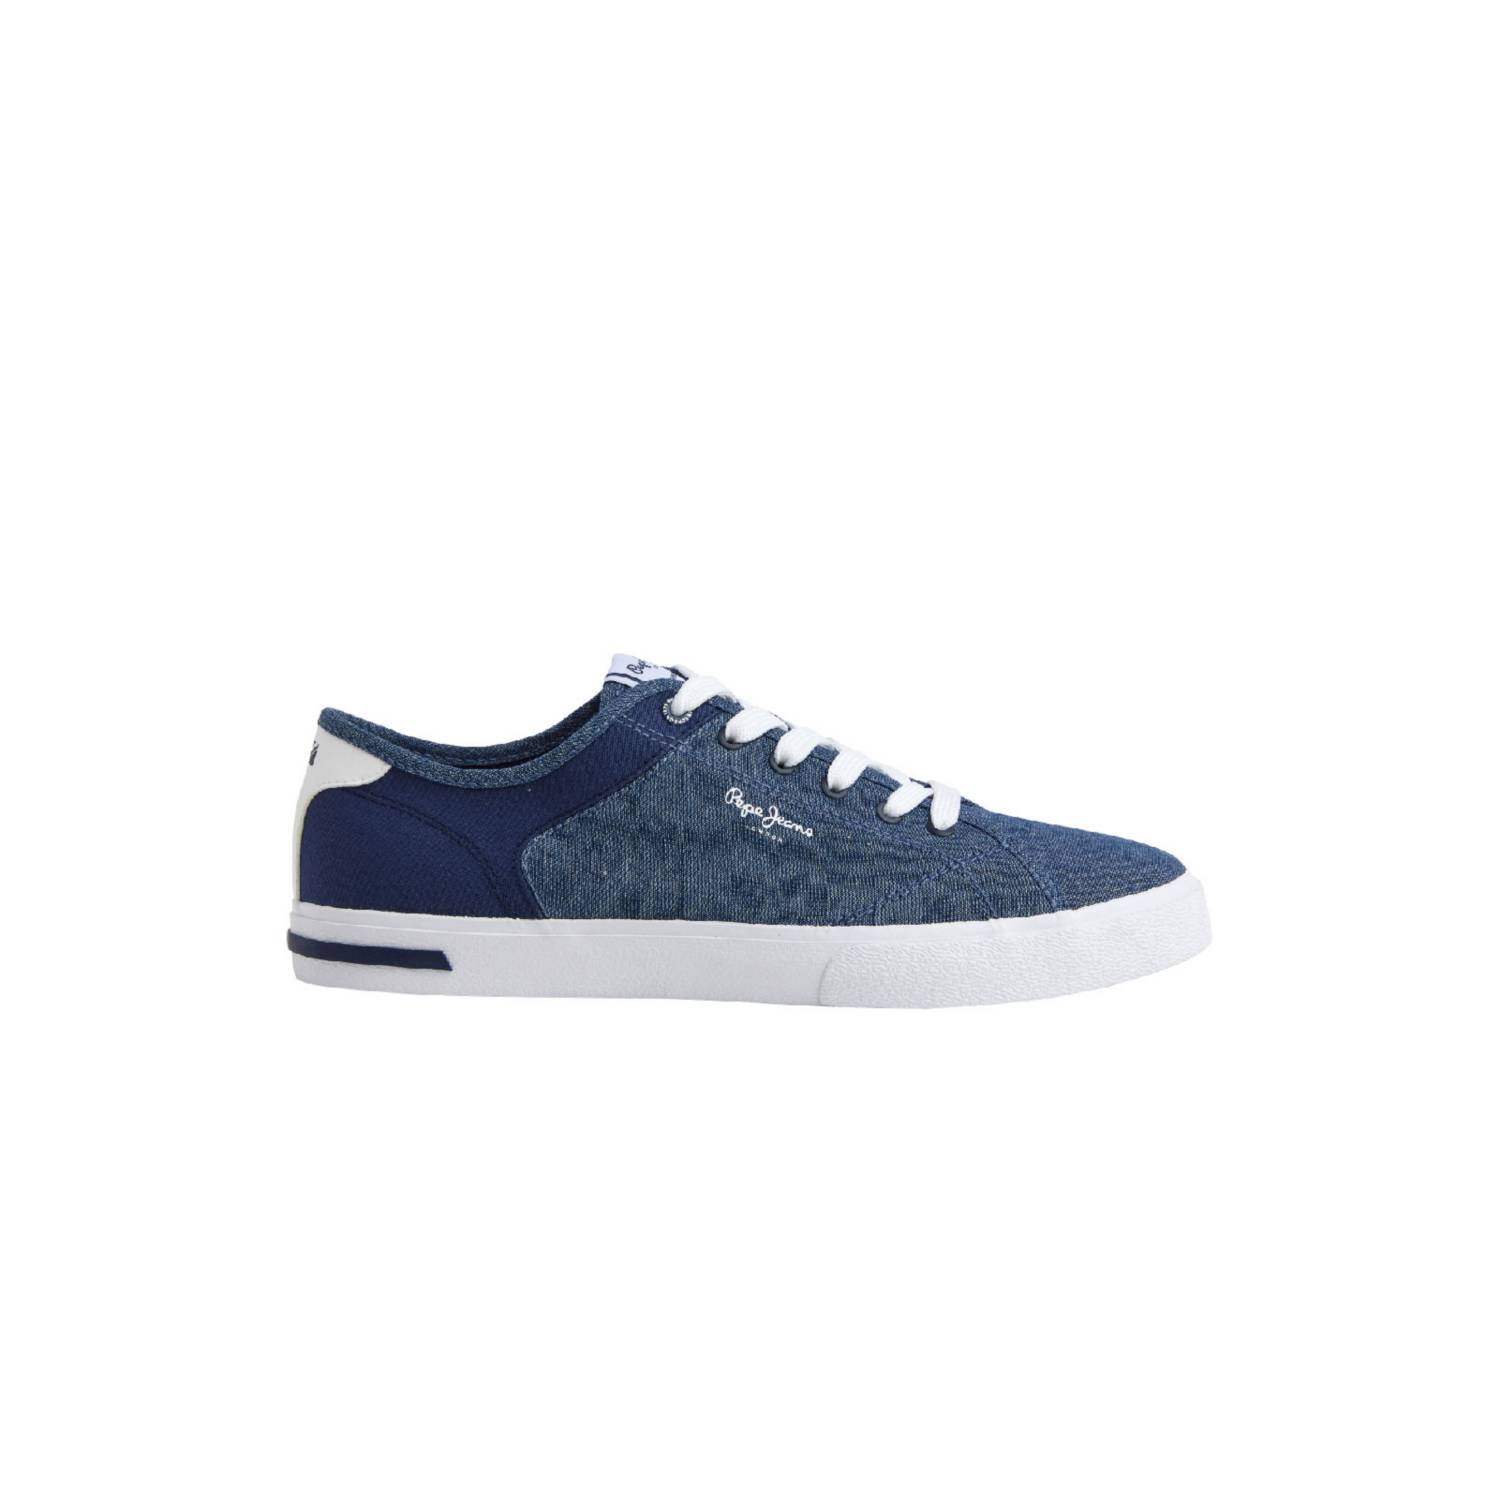 Tenis Pepe Jeans Player Basic Summer Color Blanco para Hombre PEPE JEANS